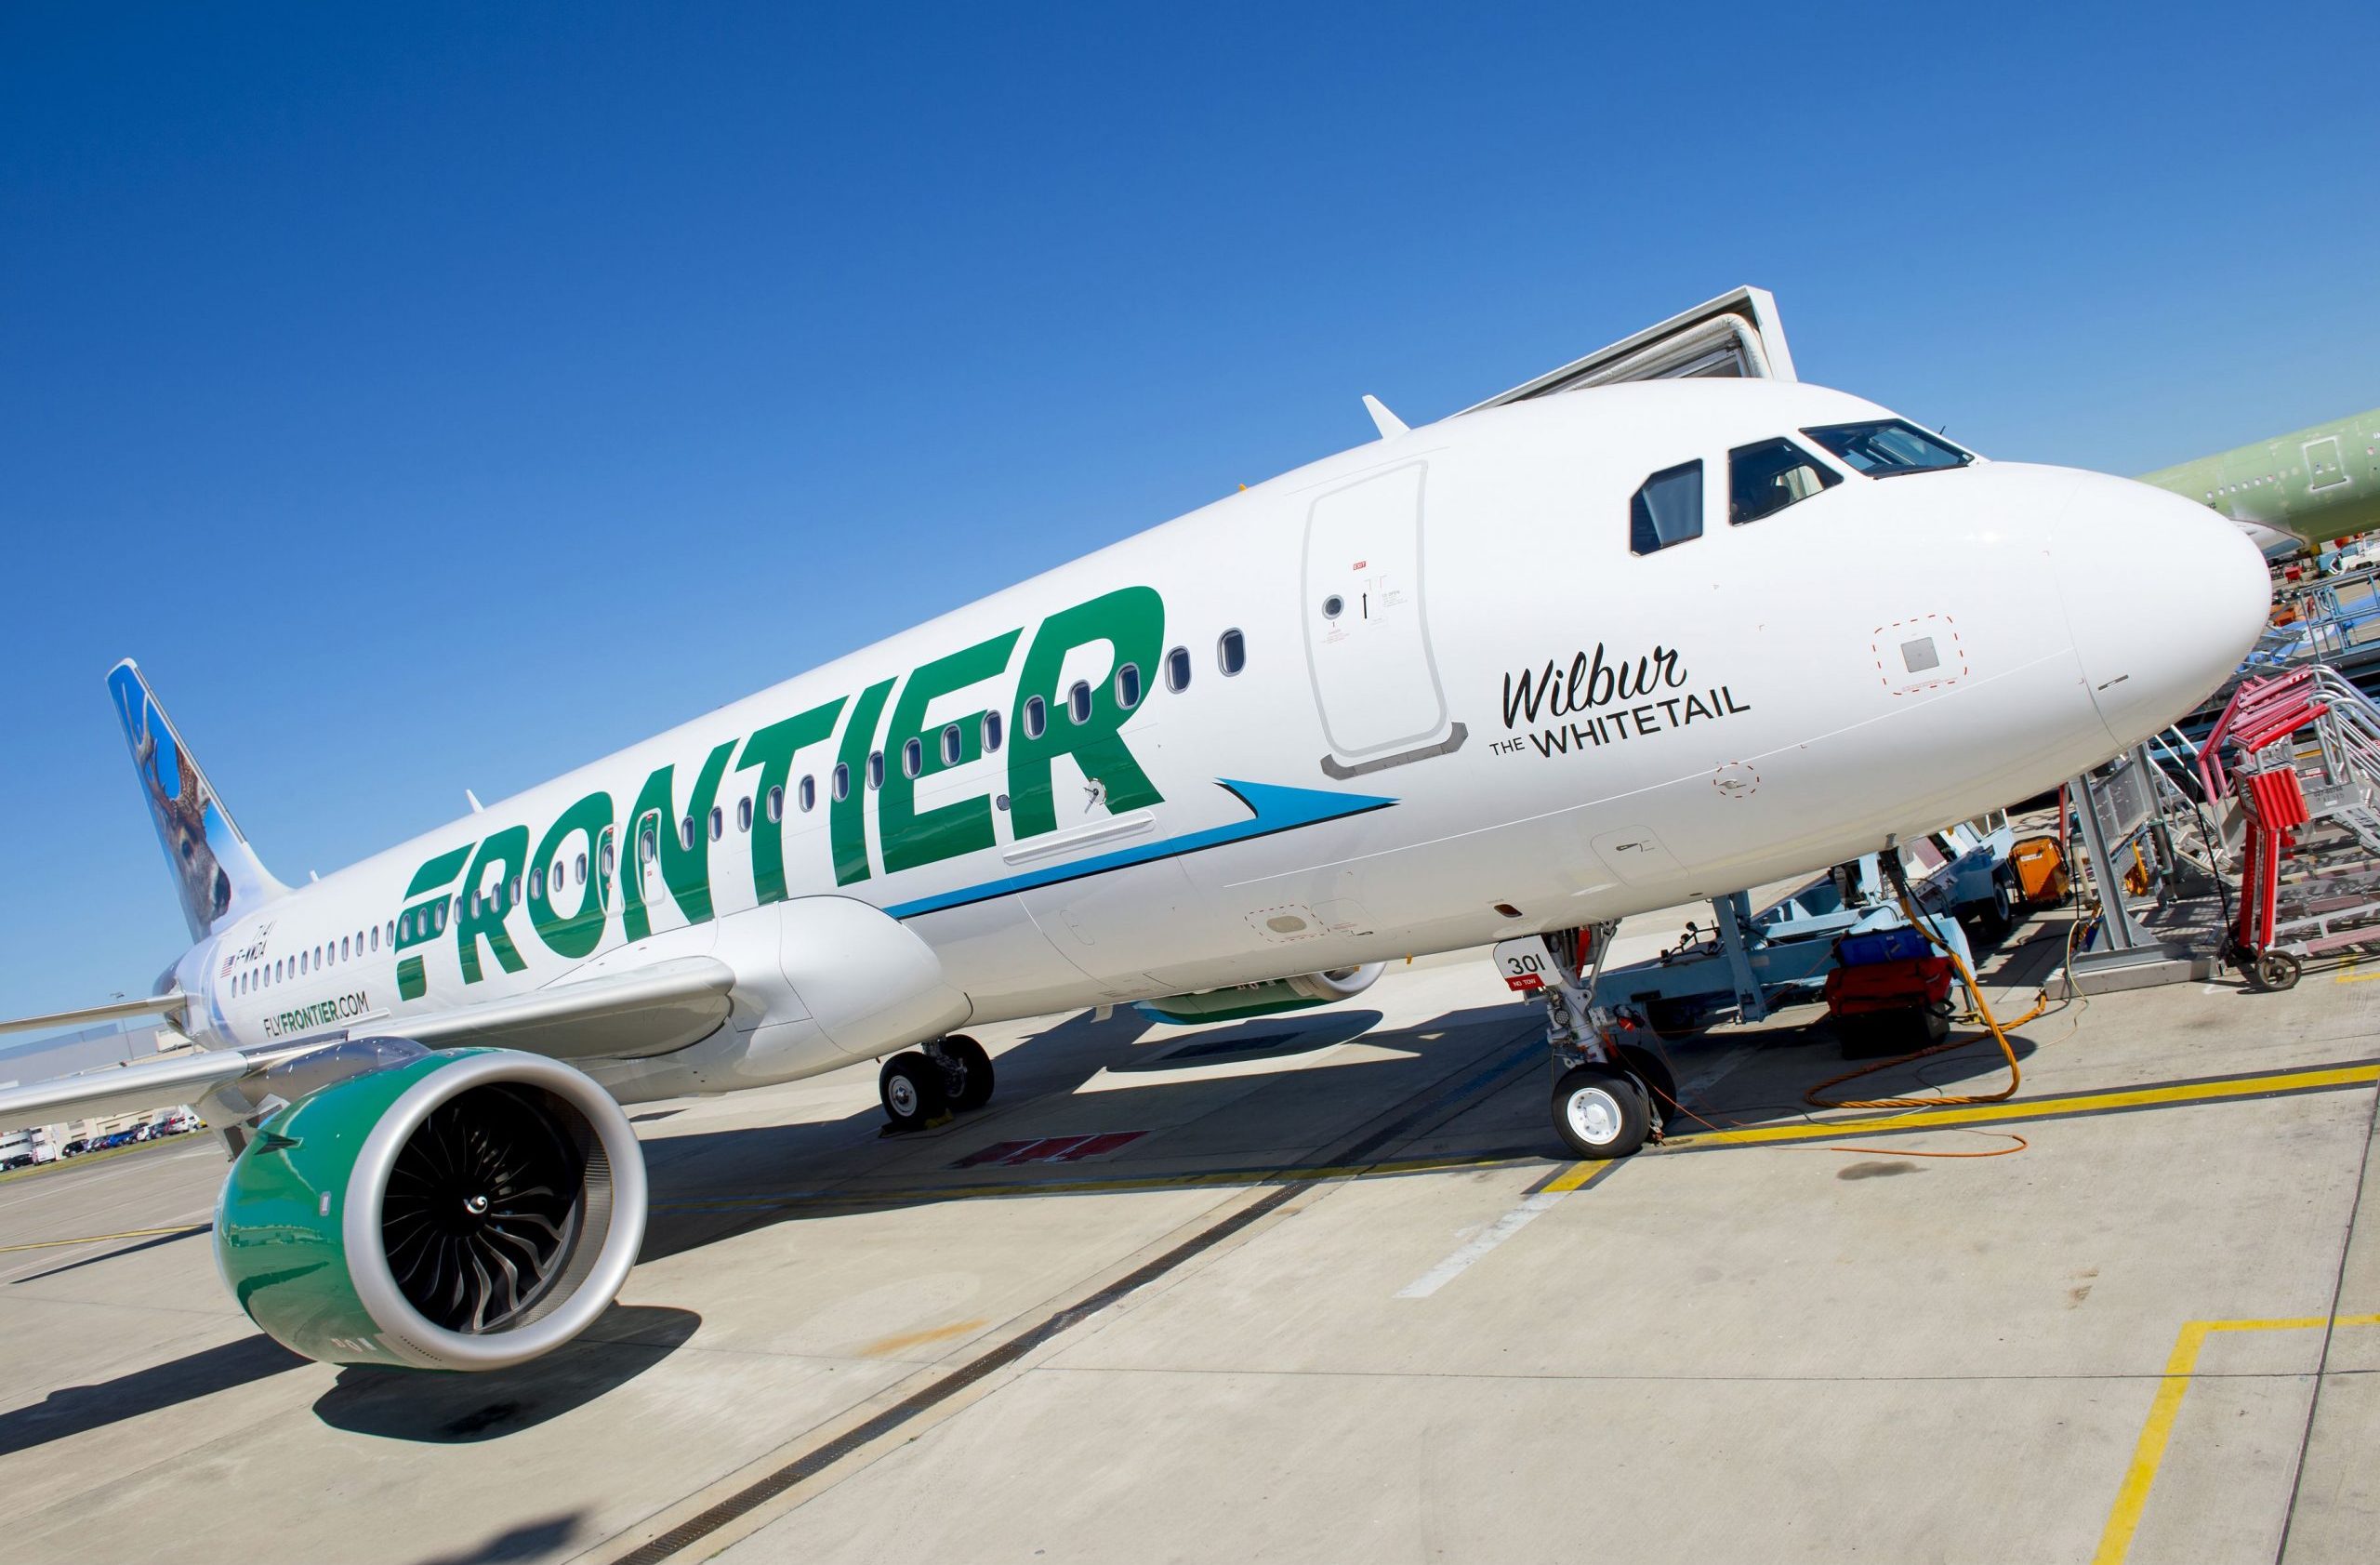 VIDEO: Woman On �No Fly List� Goes Berserk at Frontier Check-in Counter as Her Child Pleads for Her to Stop